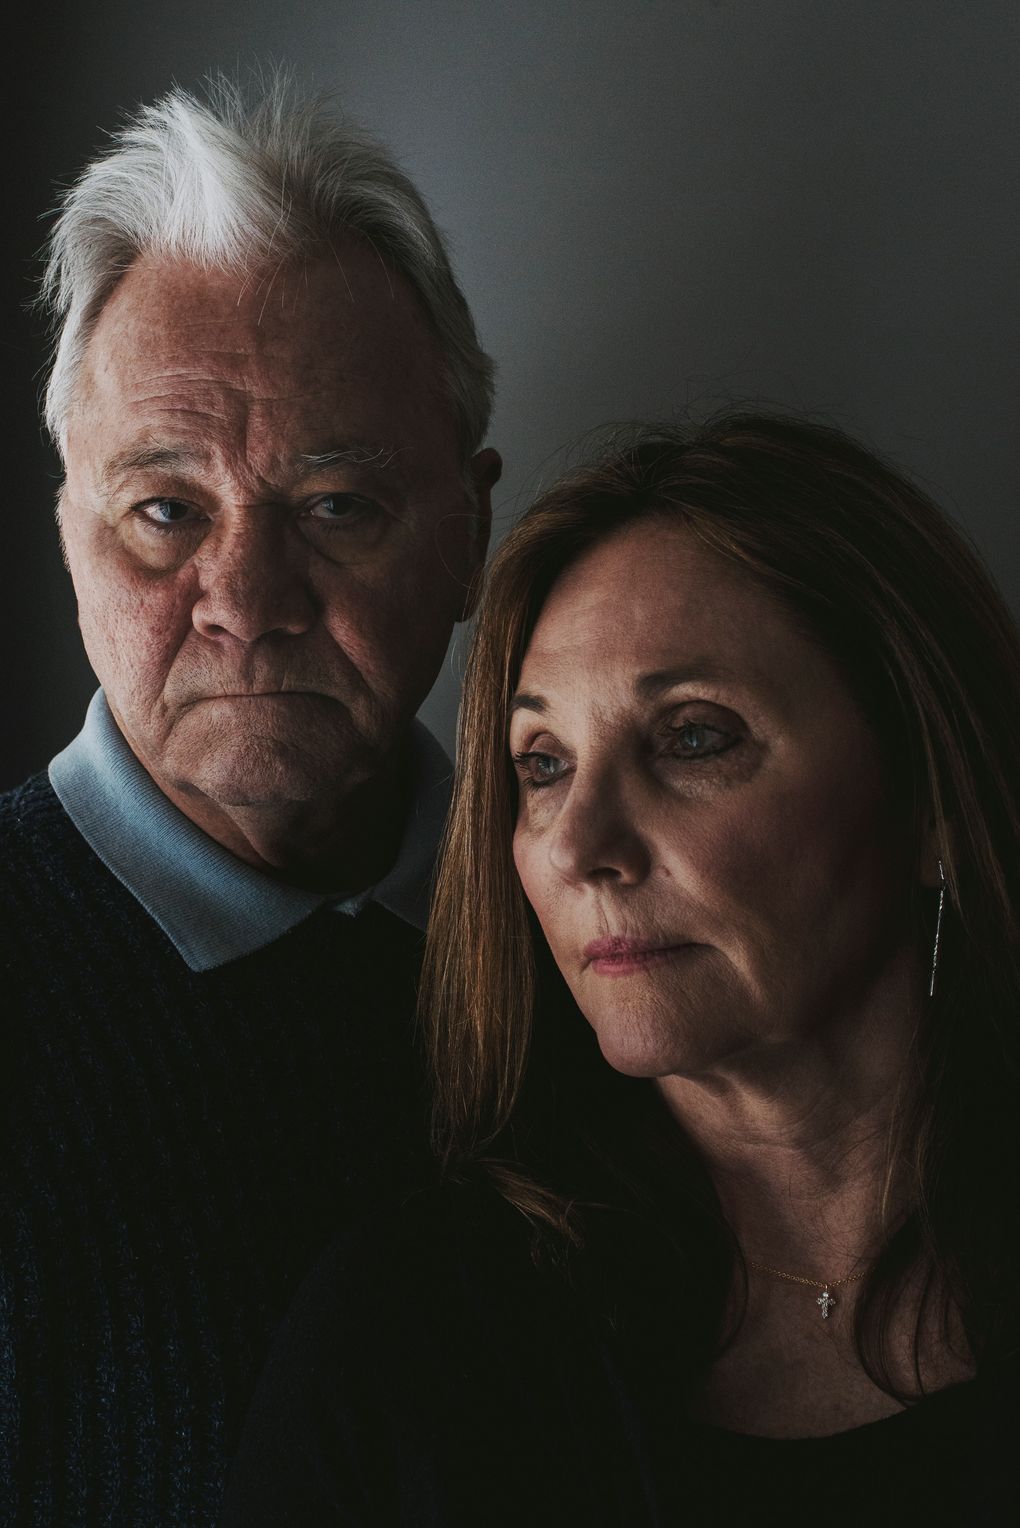 Cindy Hatfield and her, brother Glenn Pierce. After their mother’s amputation, the family sued over her care at the Allenbrooke Nursing and Rehabilitation Center in Memphis, which had a $2 million deficit on its books that year. (HOUSTON COFIELD/NYT)